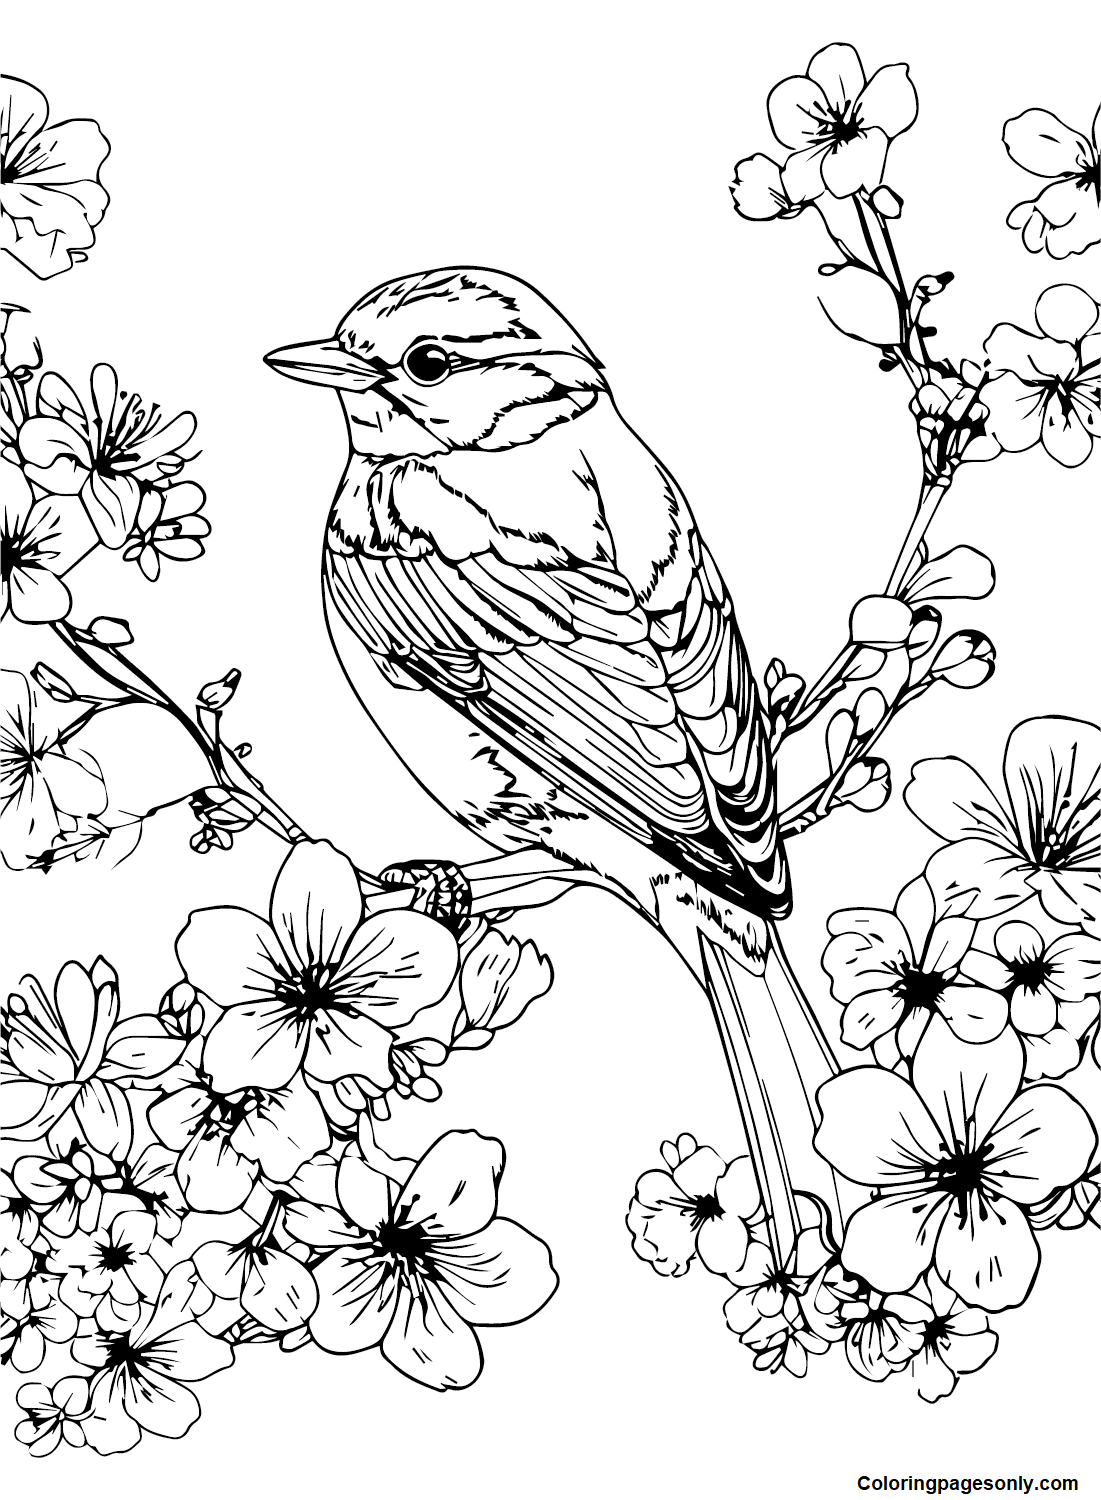 Cherry Blossom to Print Coloring Page